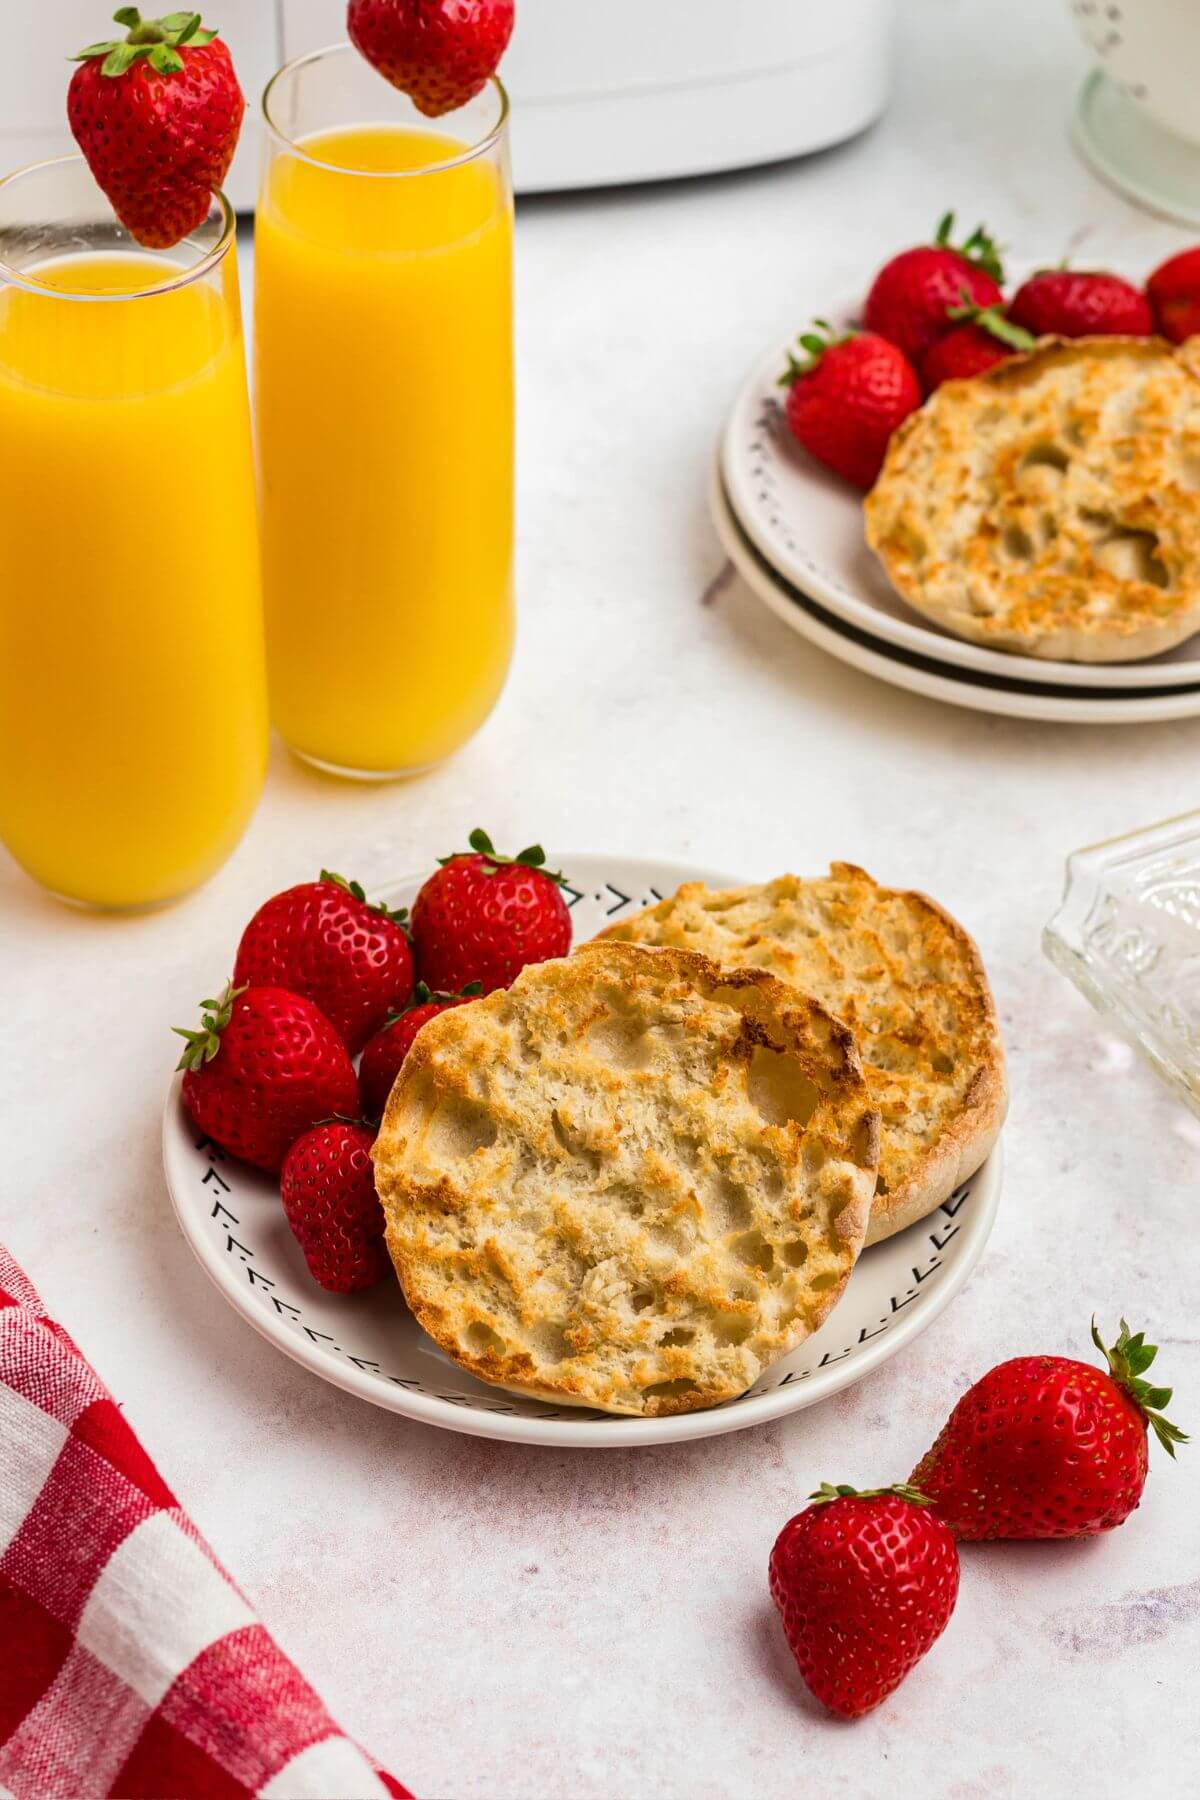 Golden crispy English muffins on a white plate served with strawberries and orange juice.